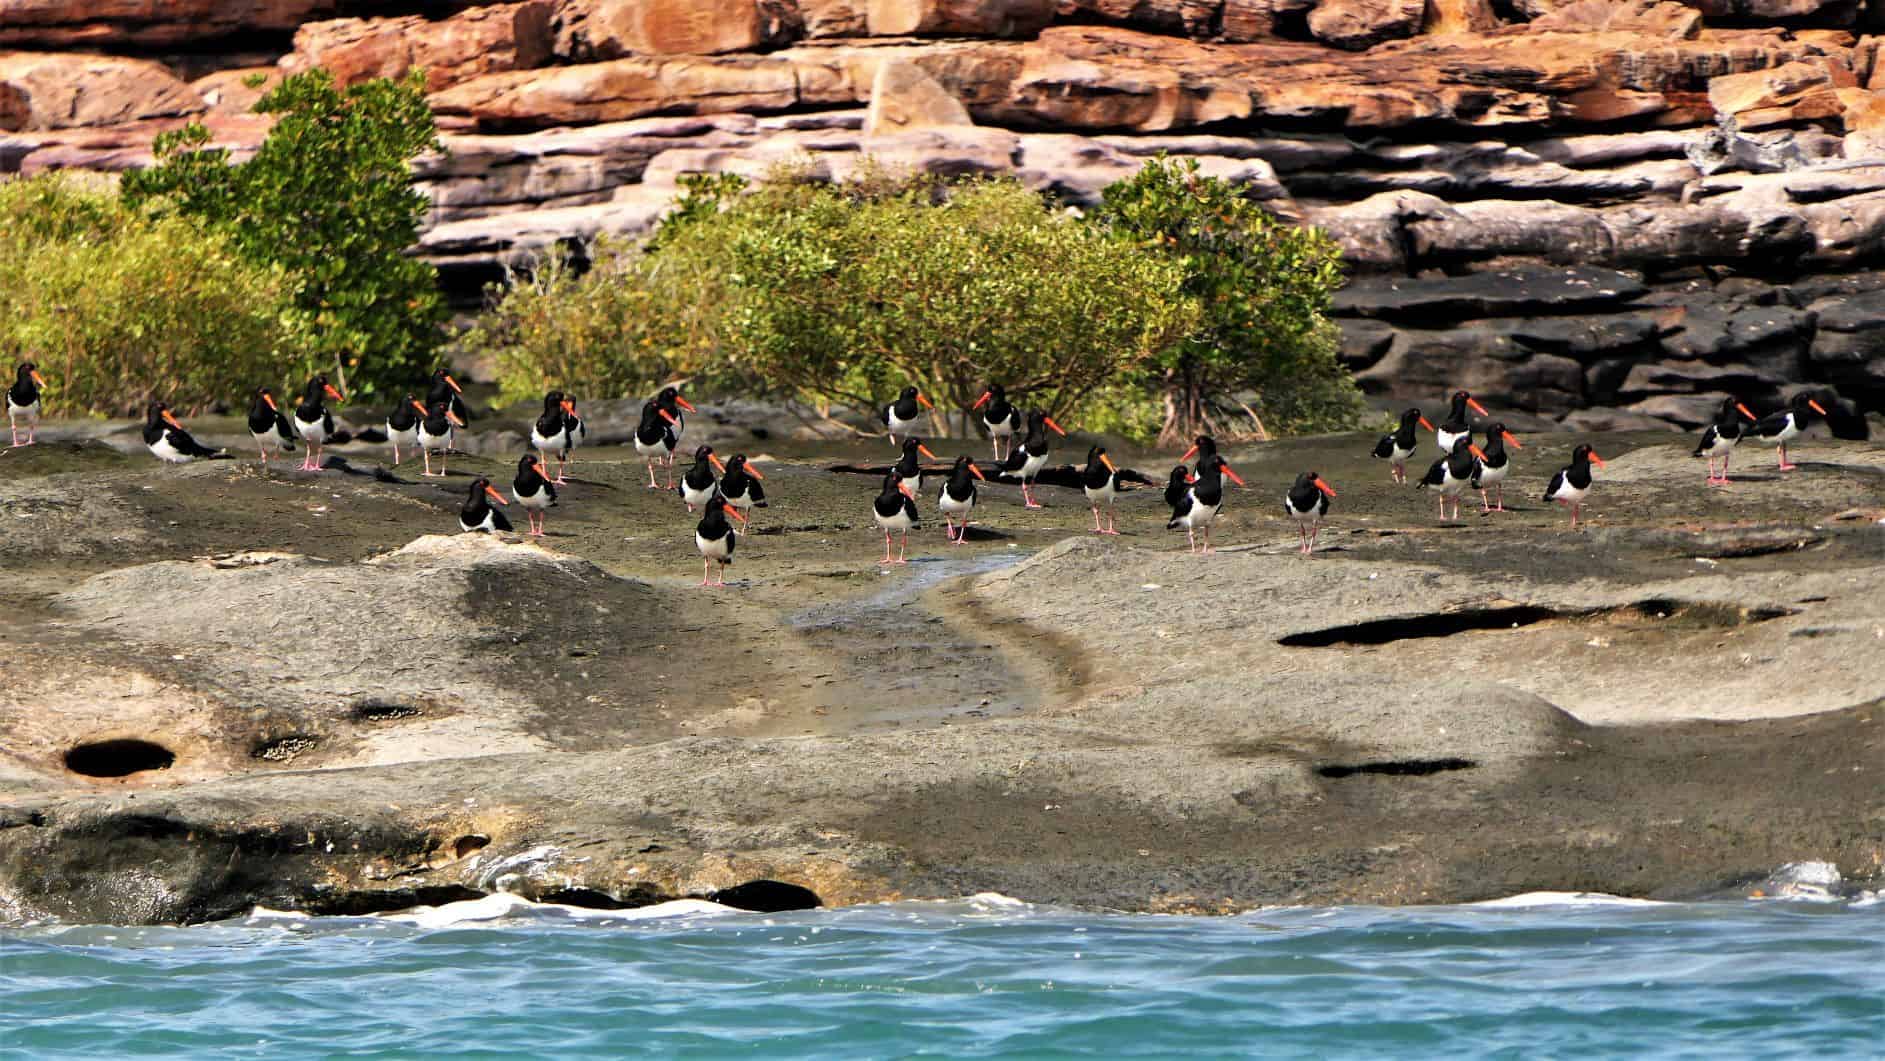 Pied Oystercatcher choir at the Warrabii West Art Site_Coral Expeditions.